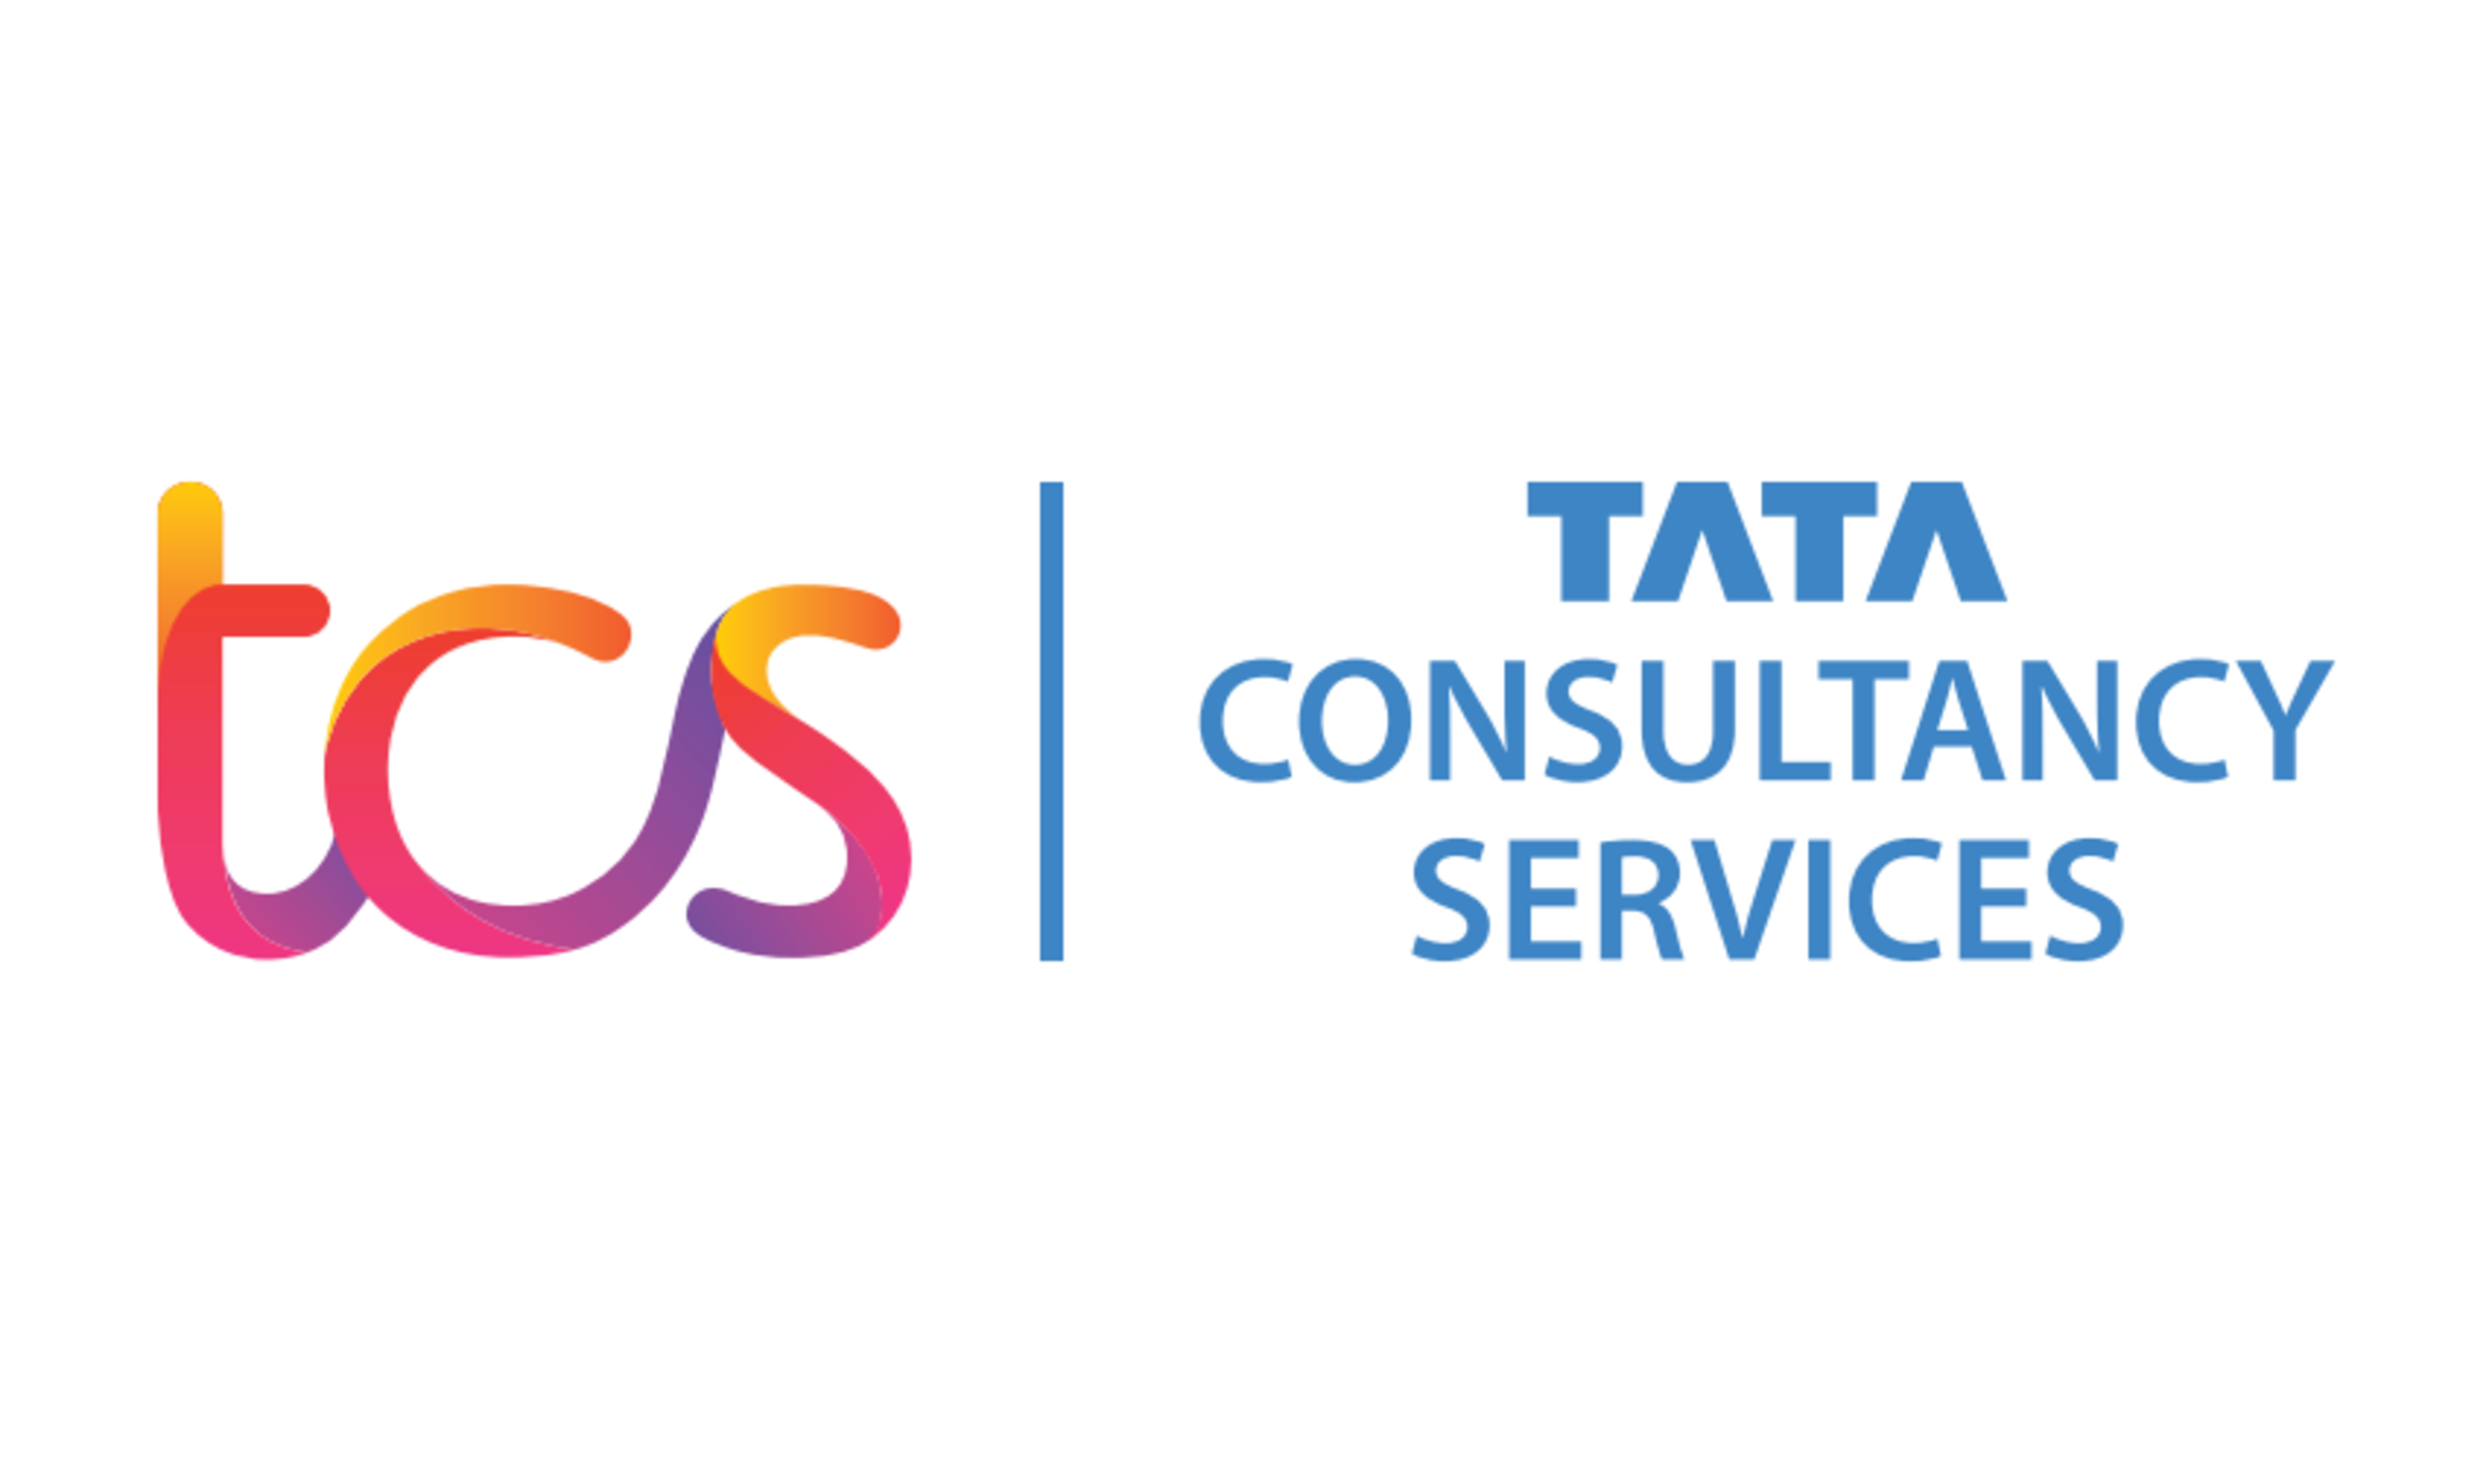 tata consultancy service limited (tcs): subsidiaries - indiancompanies.in